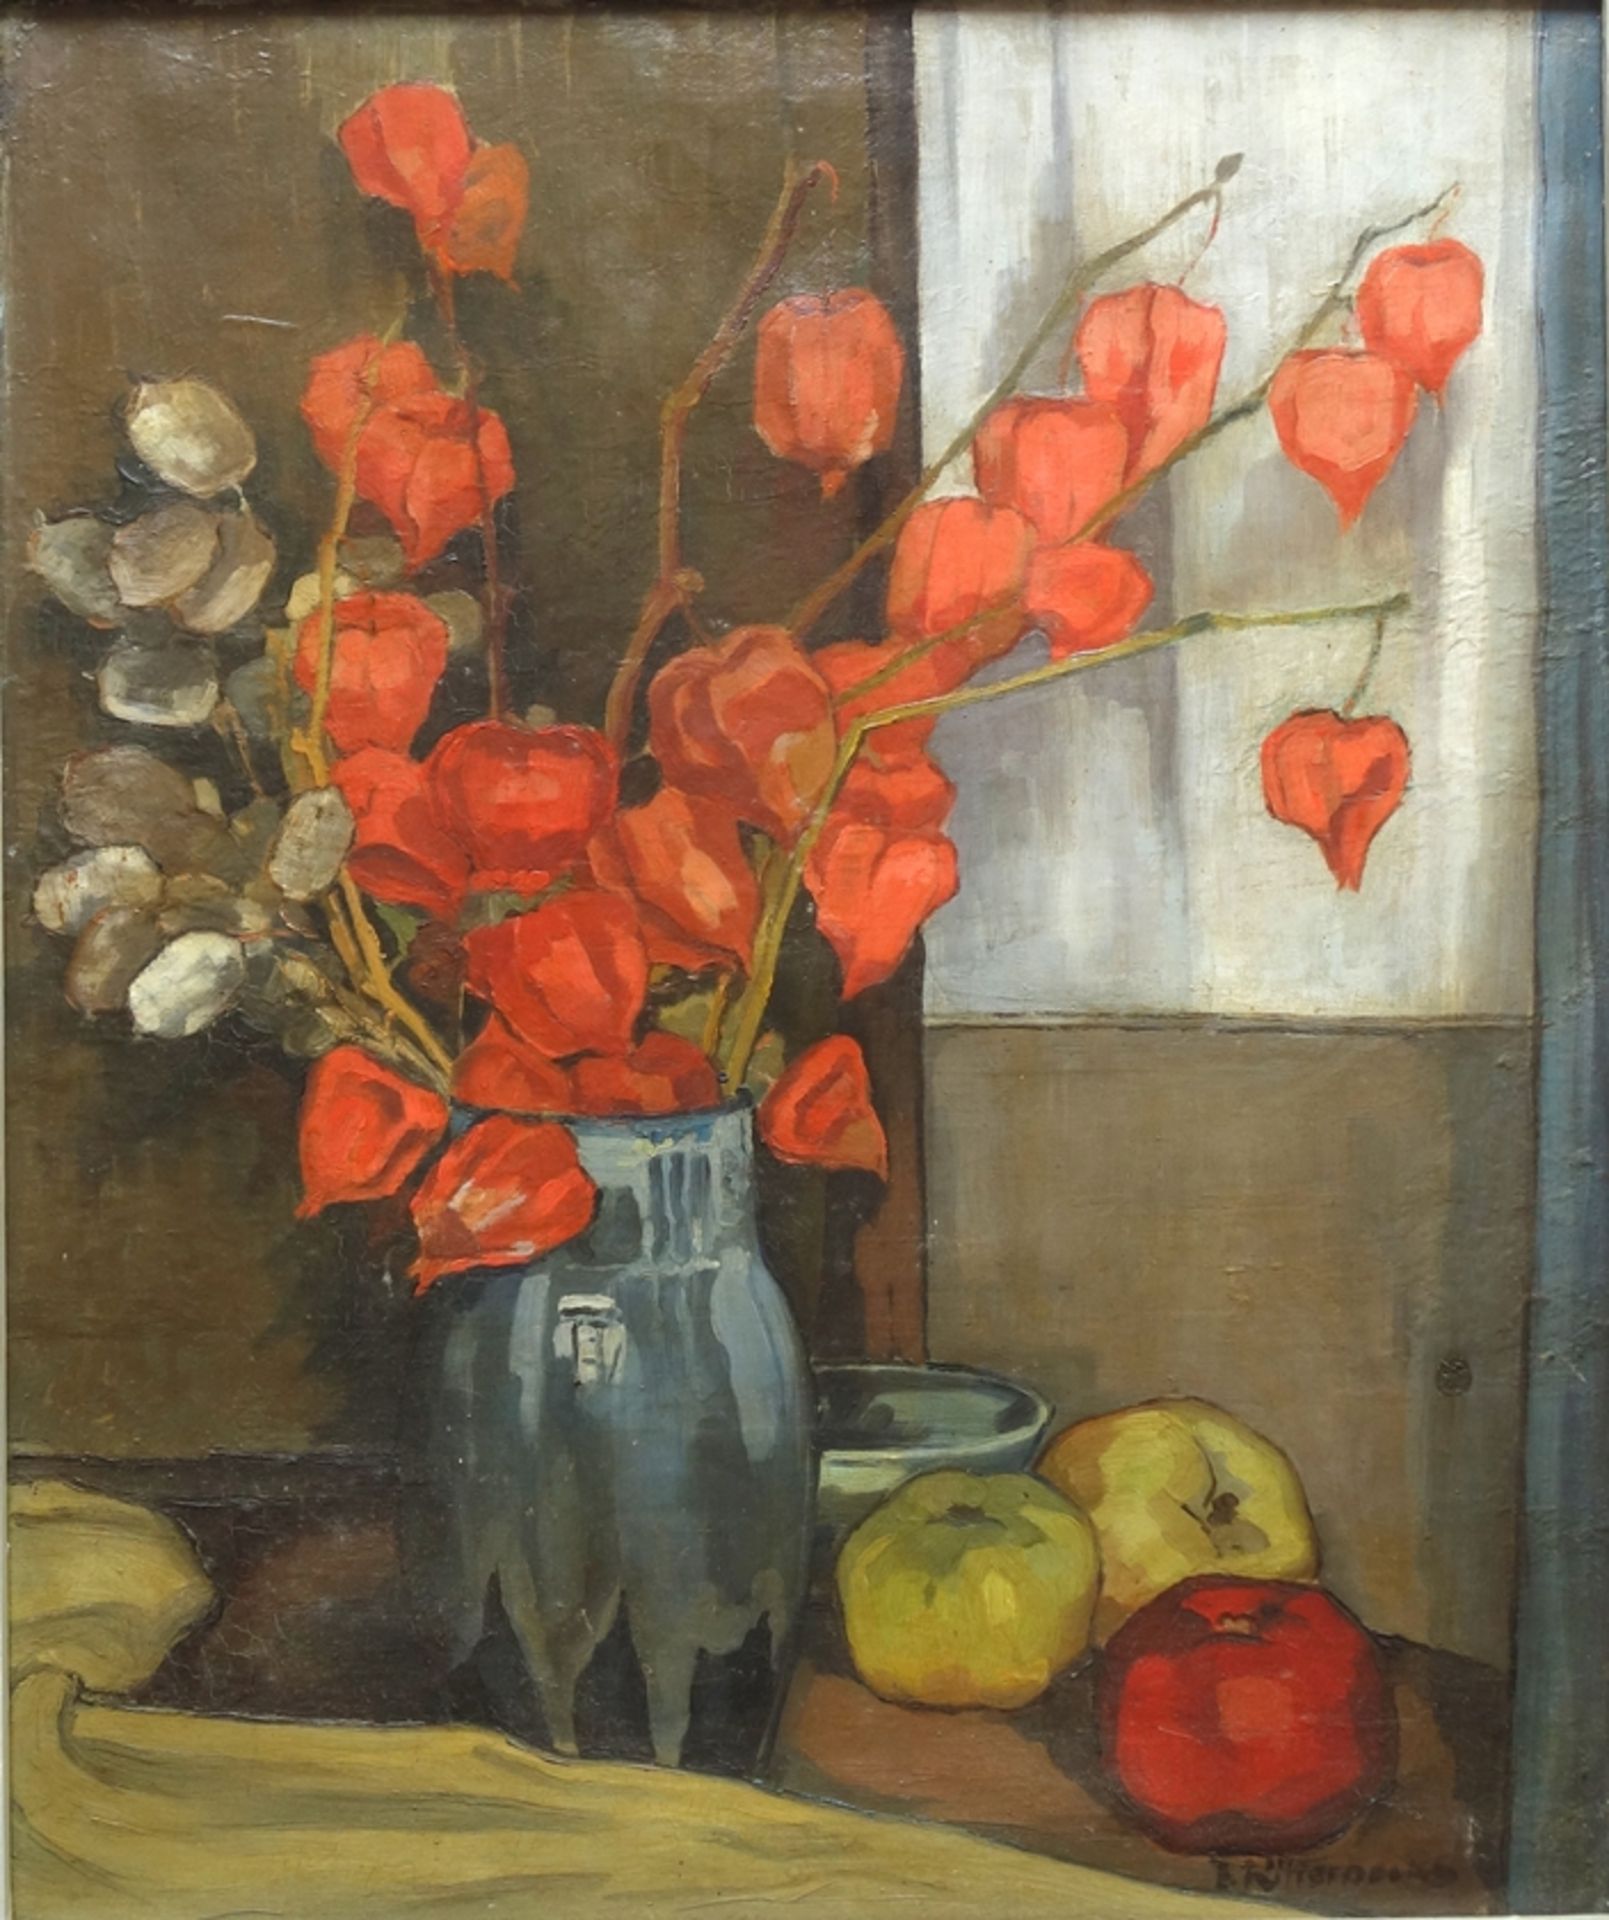 E. Ritterbecks, "Still Life with Silver Leaf, Lampionon Flowers and Quinces", 1920s, oil/canvas - Image 2 of 4